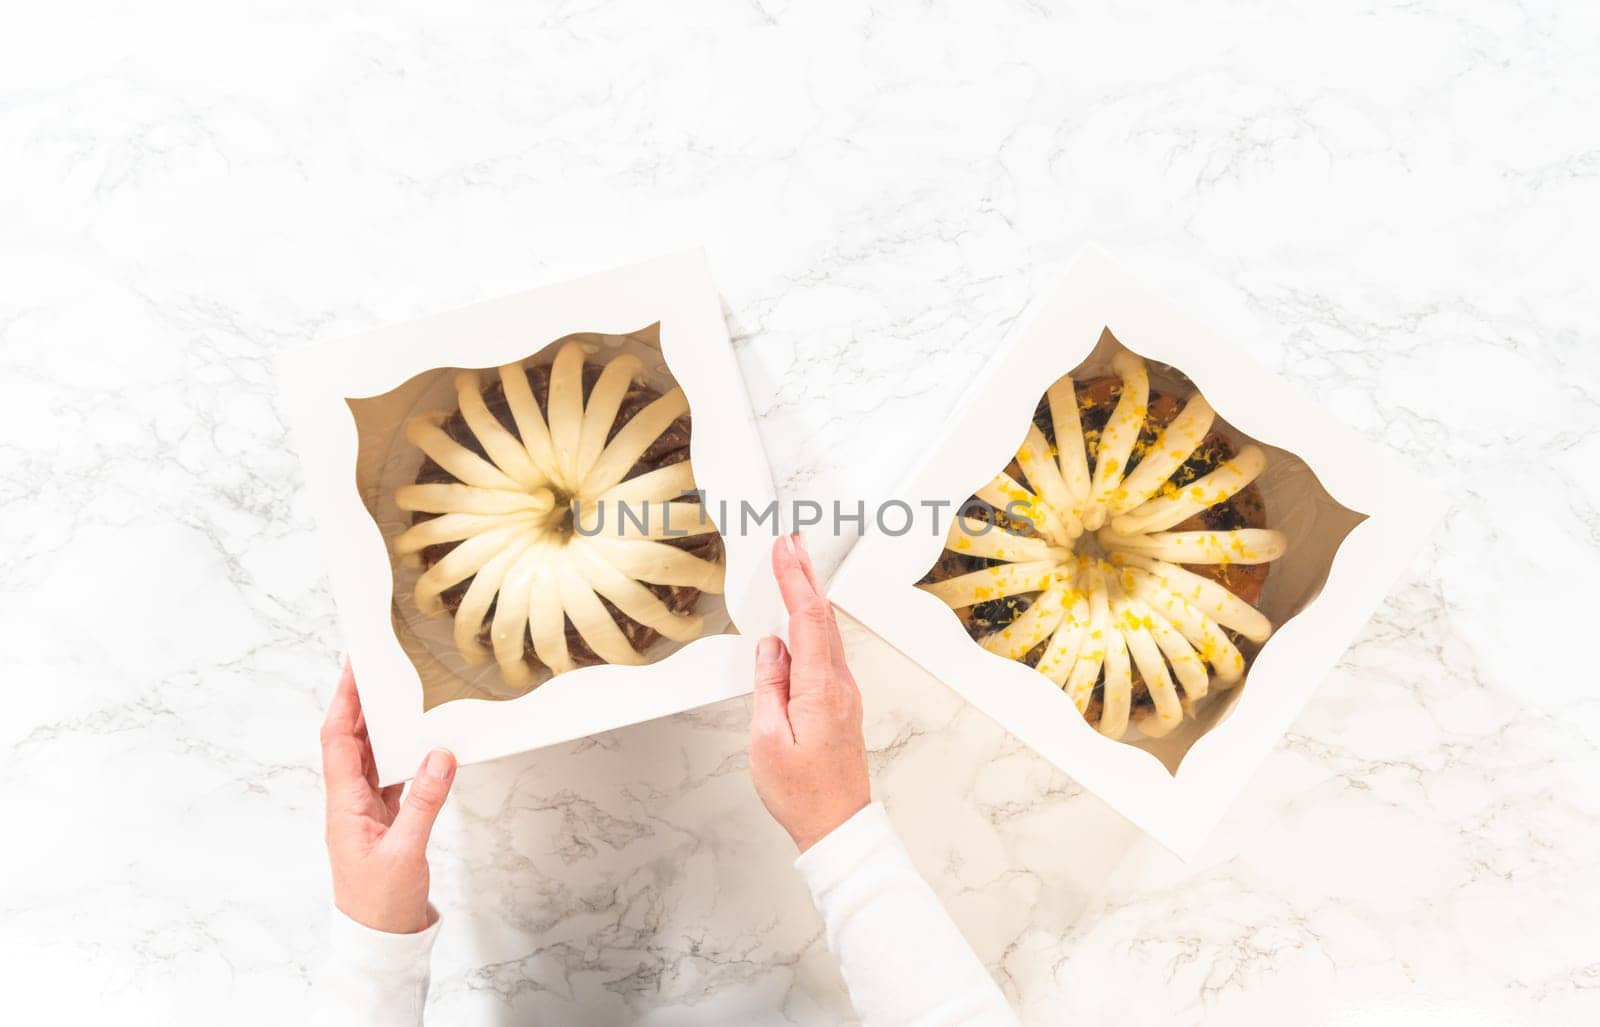 Flat lay. The freshly baked bundt cakes are carefully nestled into white paper boxes, preparing them for secure transportation while maintaining their delectable appearance.